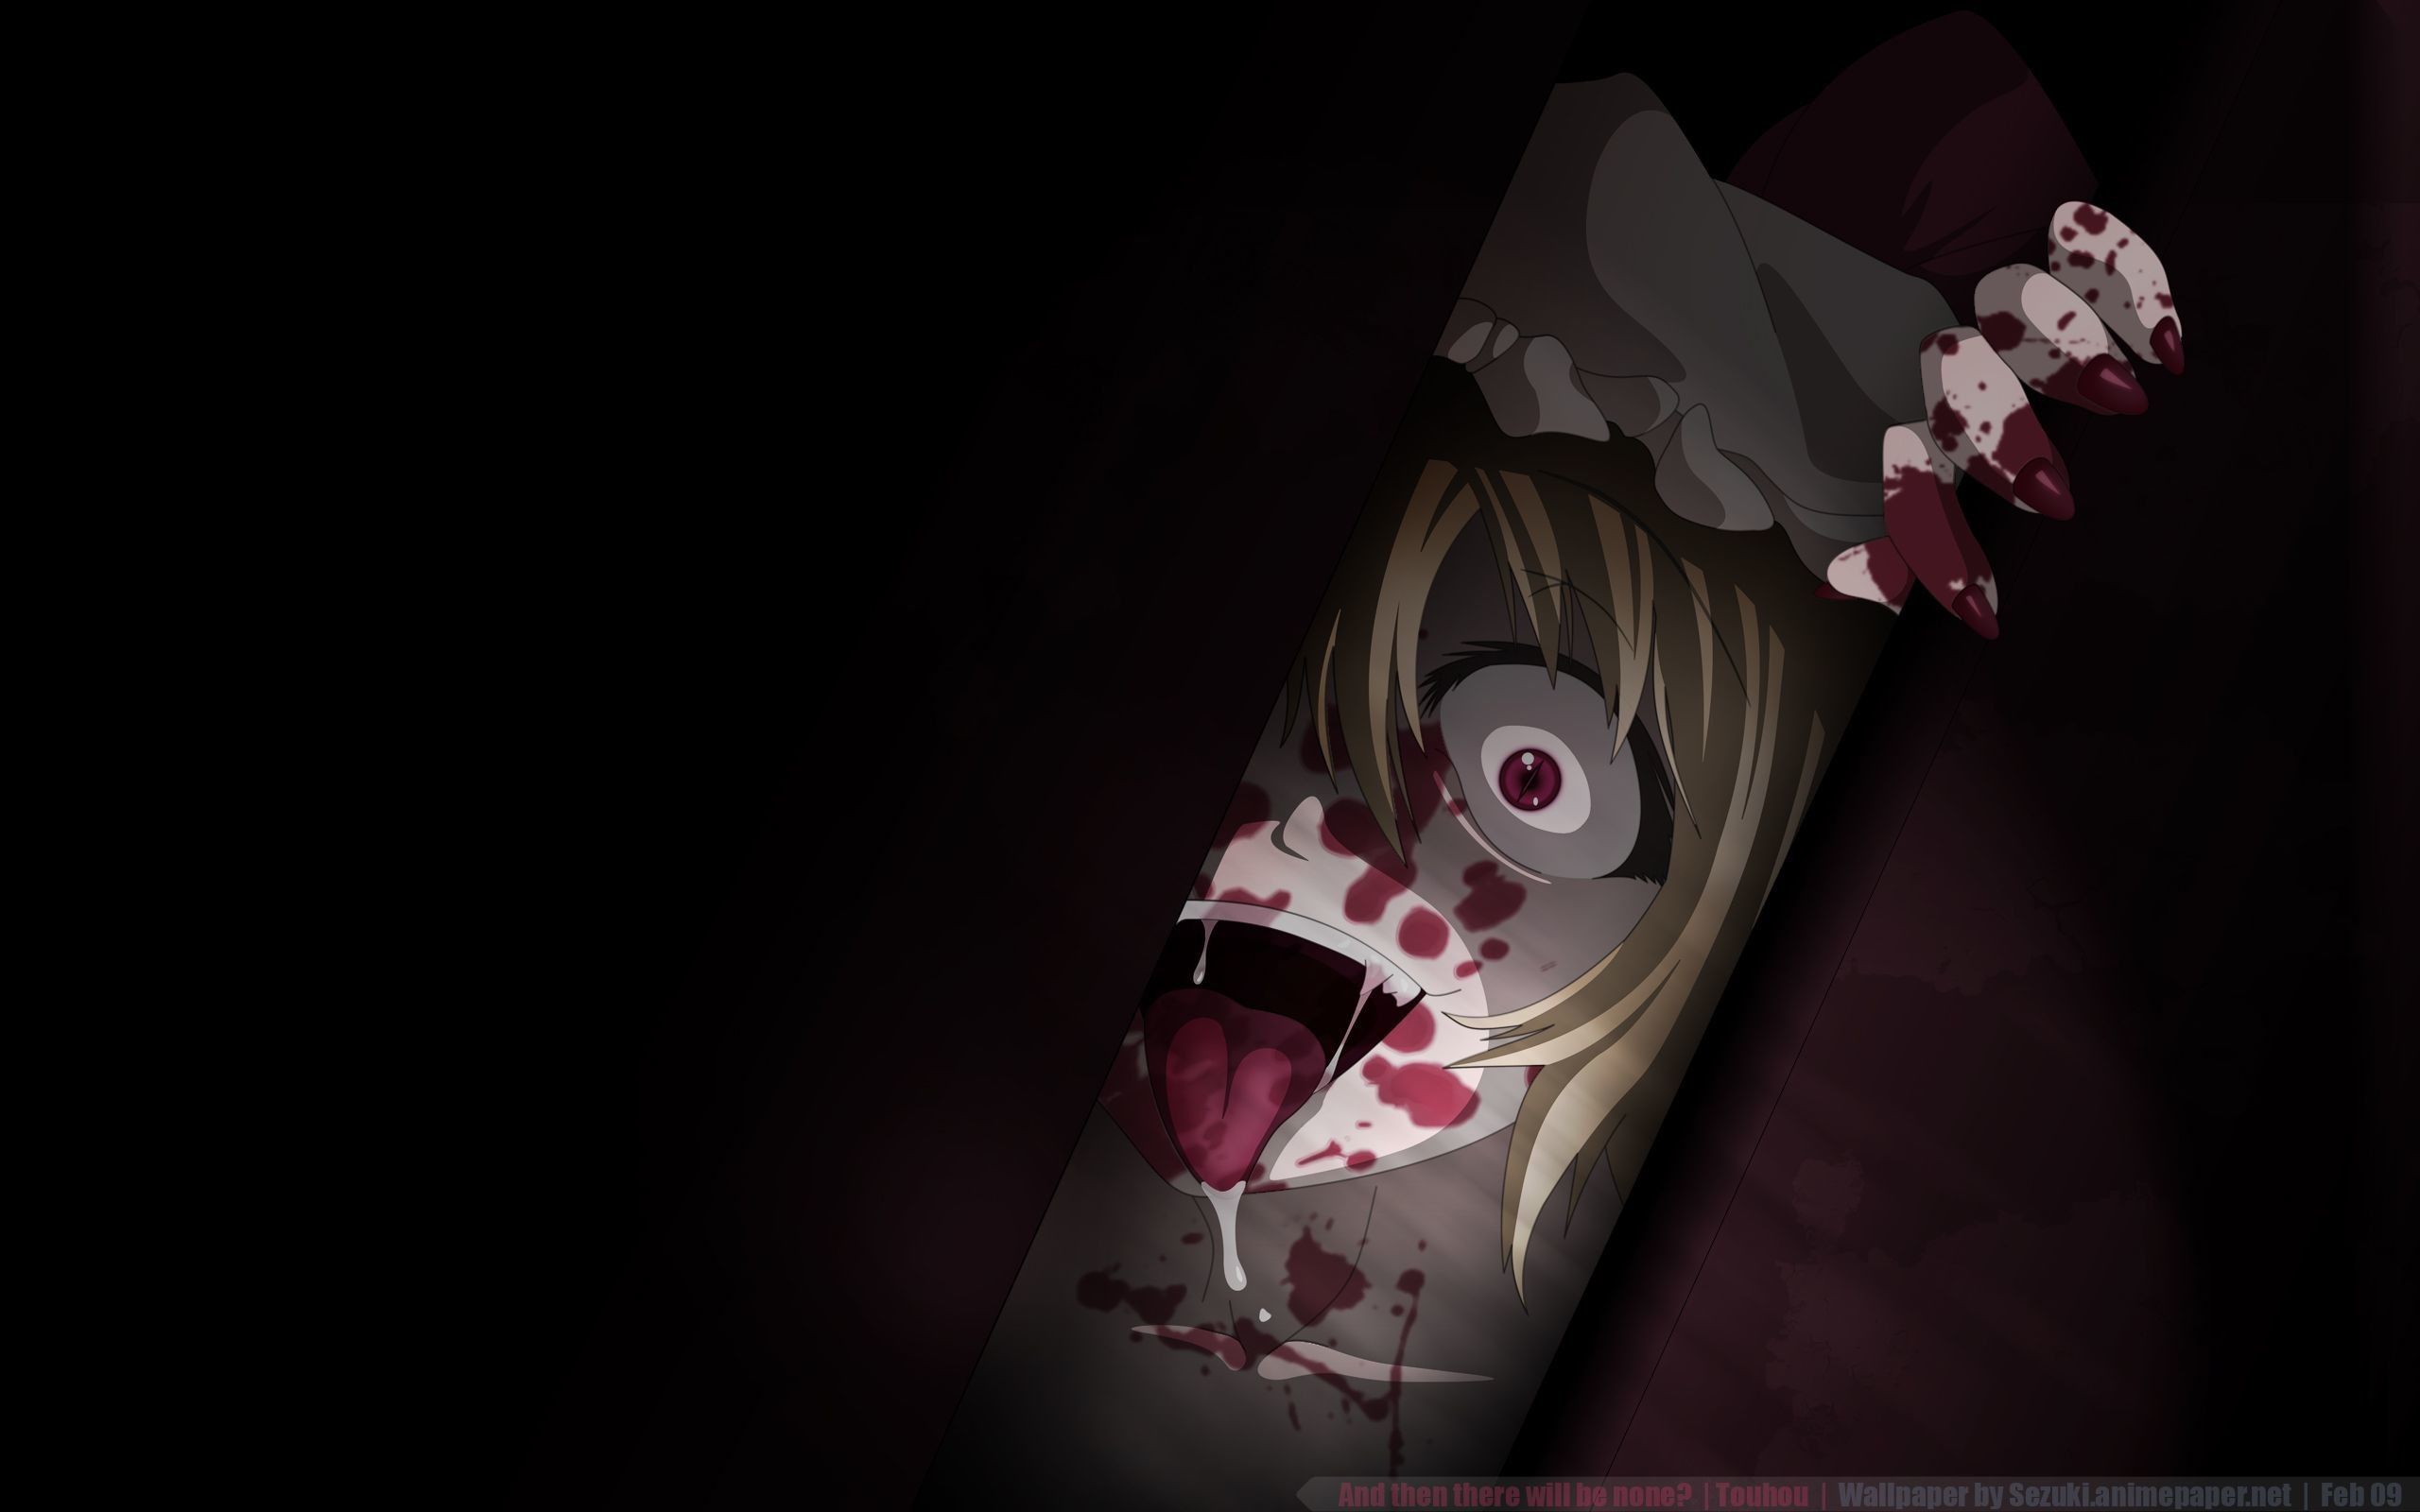 Suicidal Blooded Anime Girl Wallpapers - Wallpaper Cave